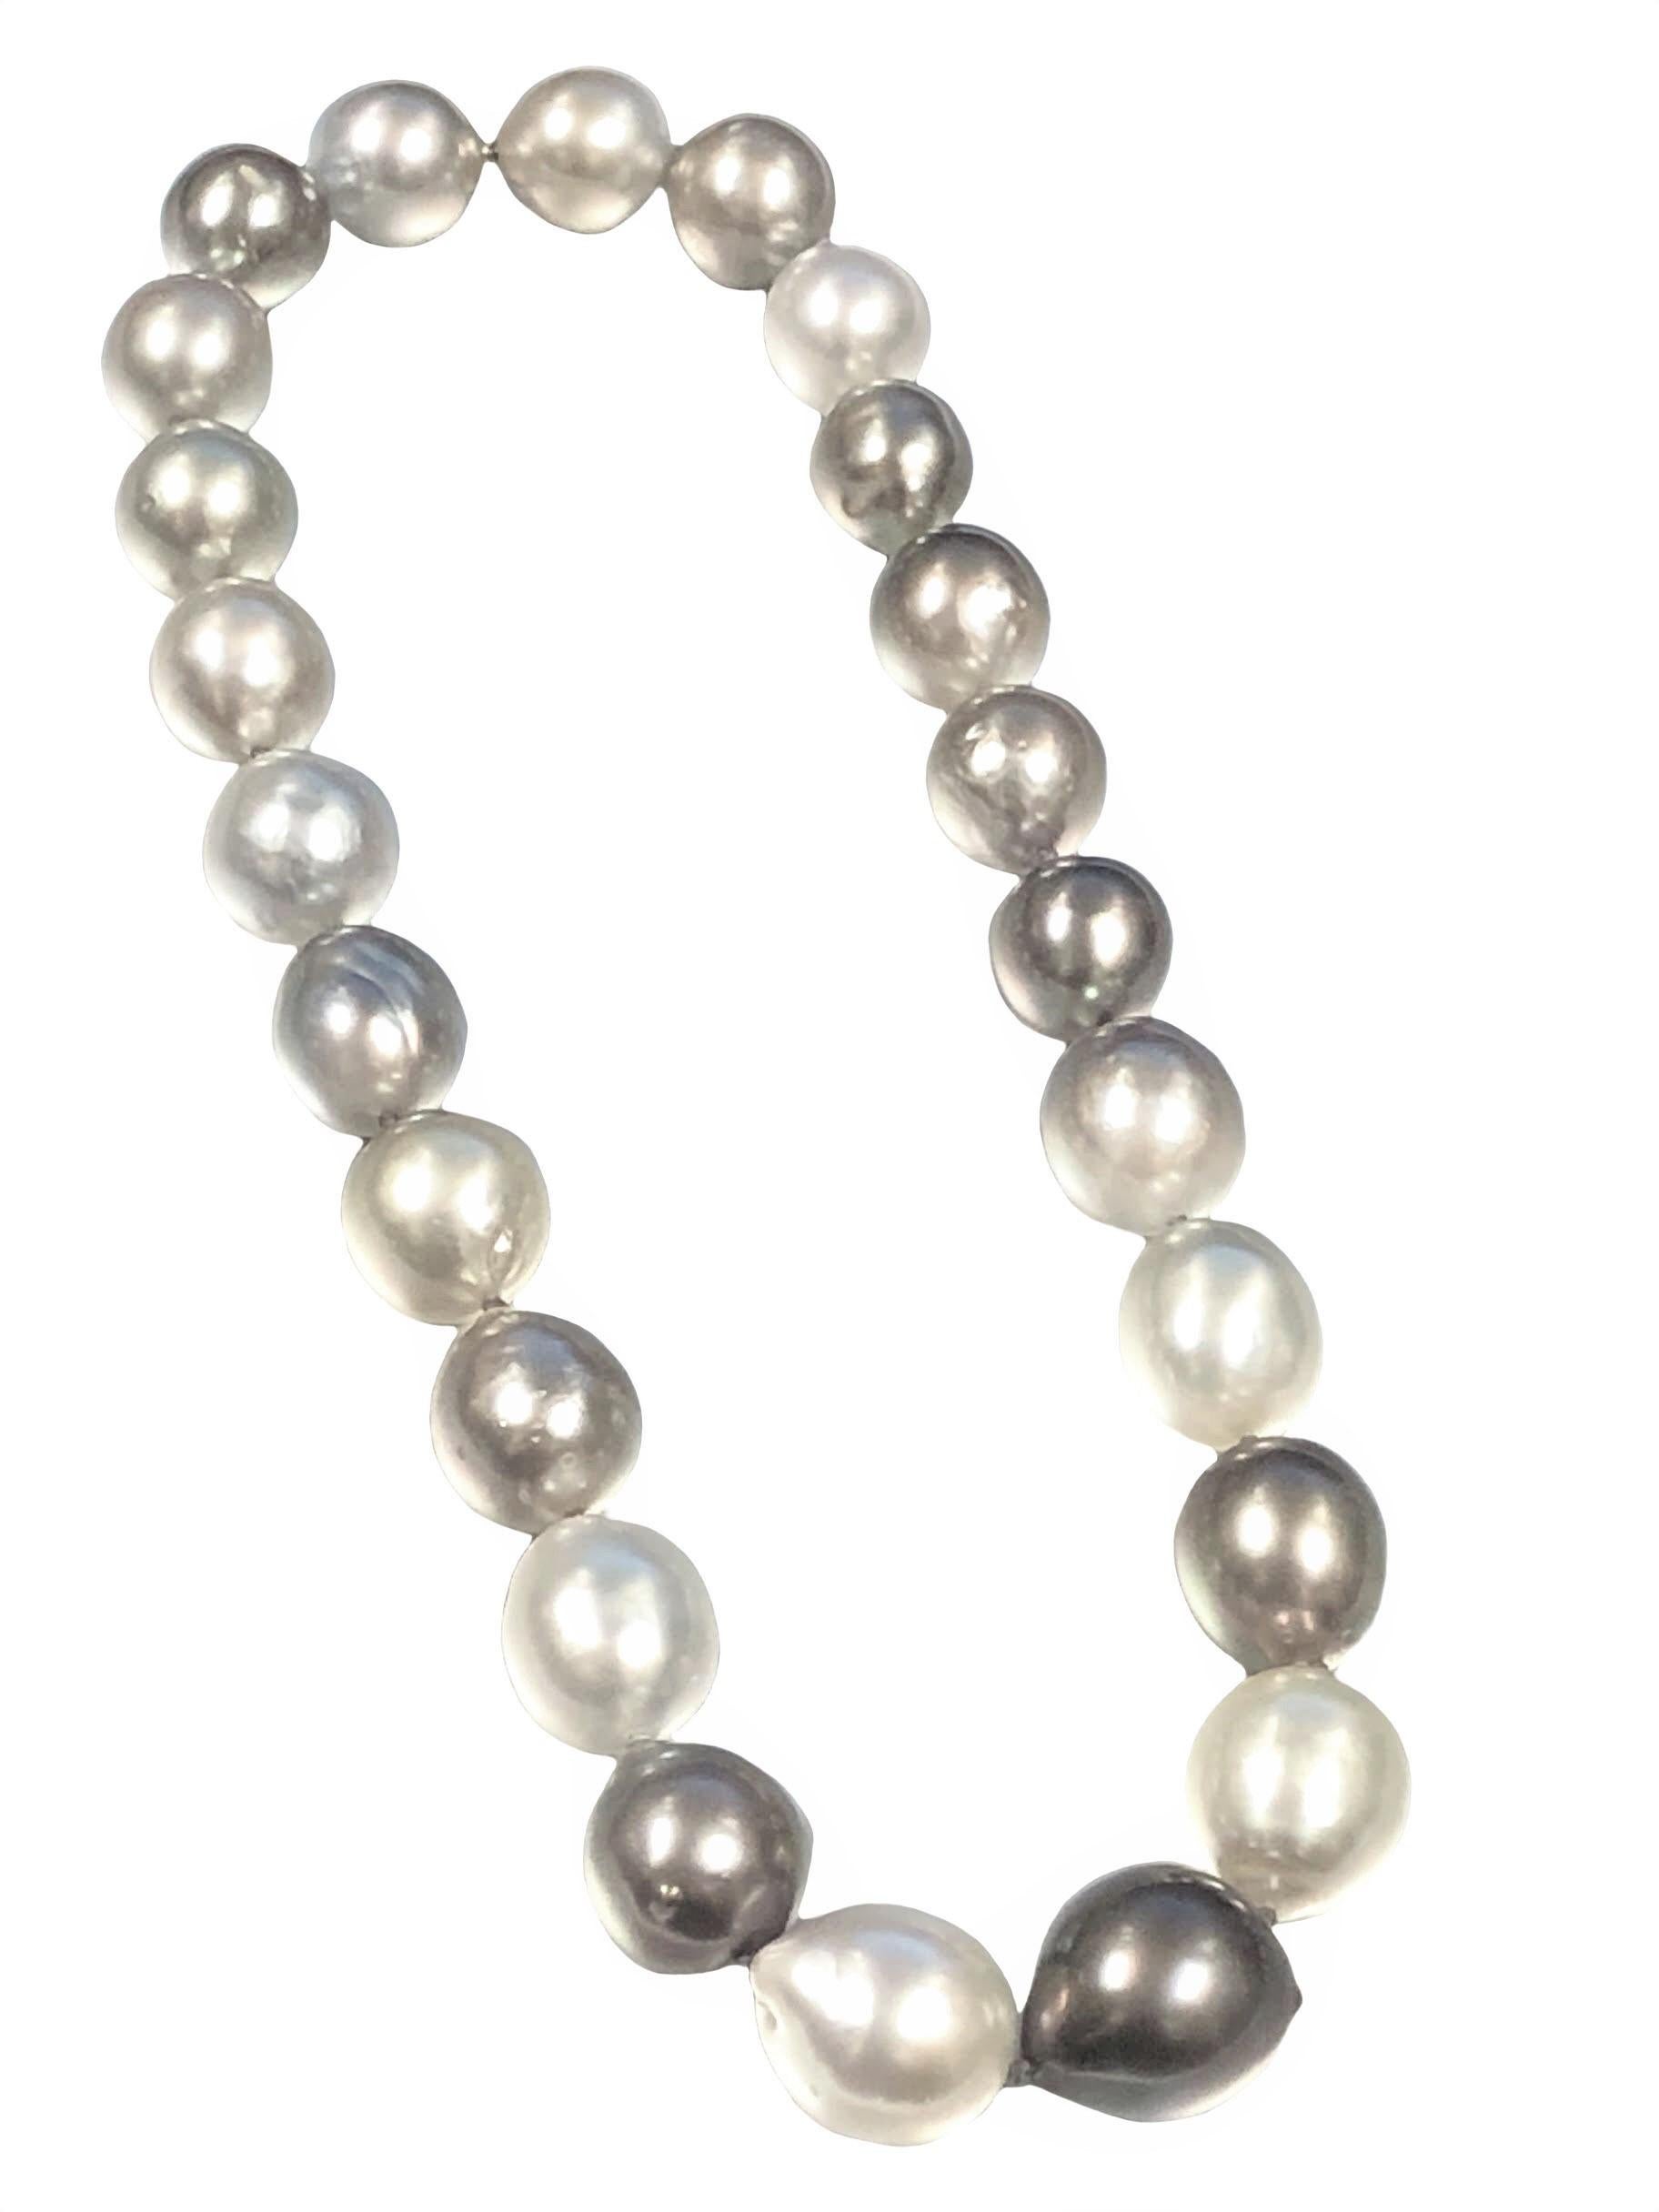 A 32 Inch Strand of Tahitian South Sea Pearls that breaks down into either a 17 1/2 and a 14 1/2 strand, comprised of Light Gray to a darker Charcoal Gray the pears measure in size from 14 X 12 to 17 X 16, having hidden threaded clasps, these all